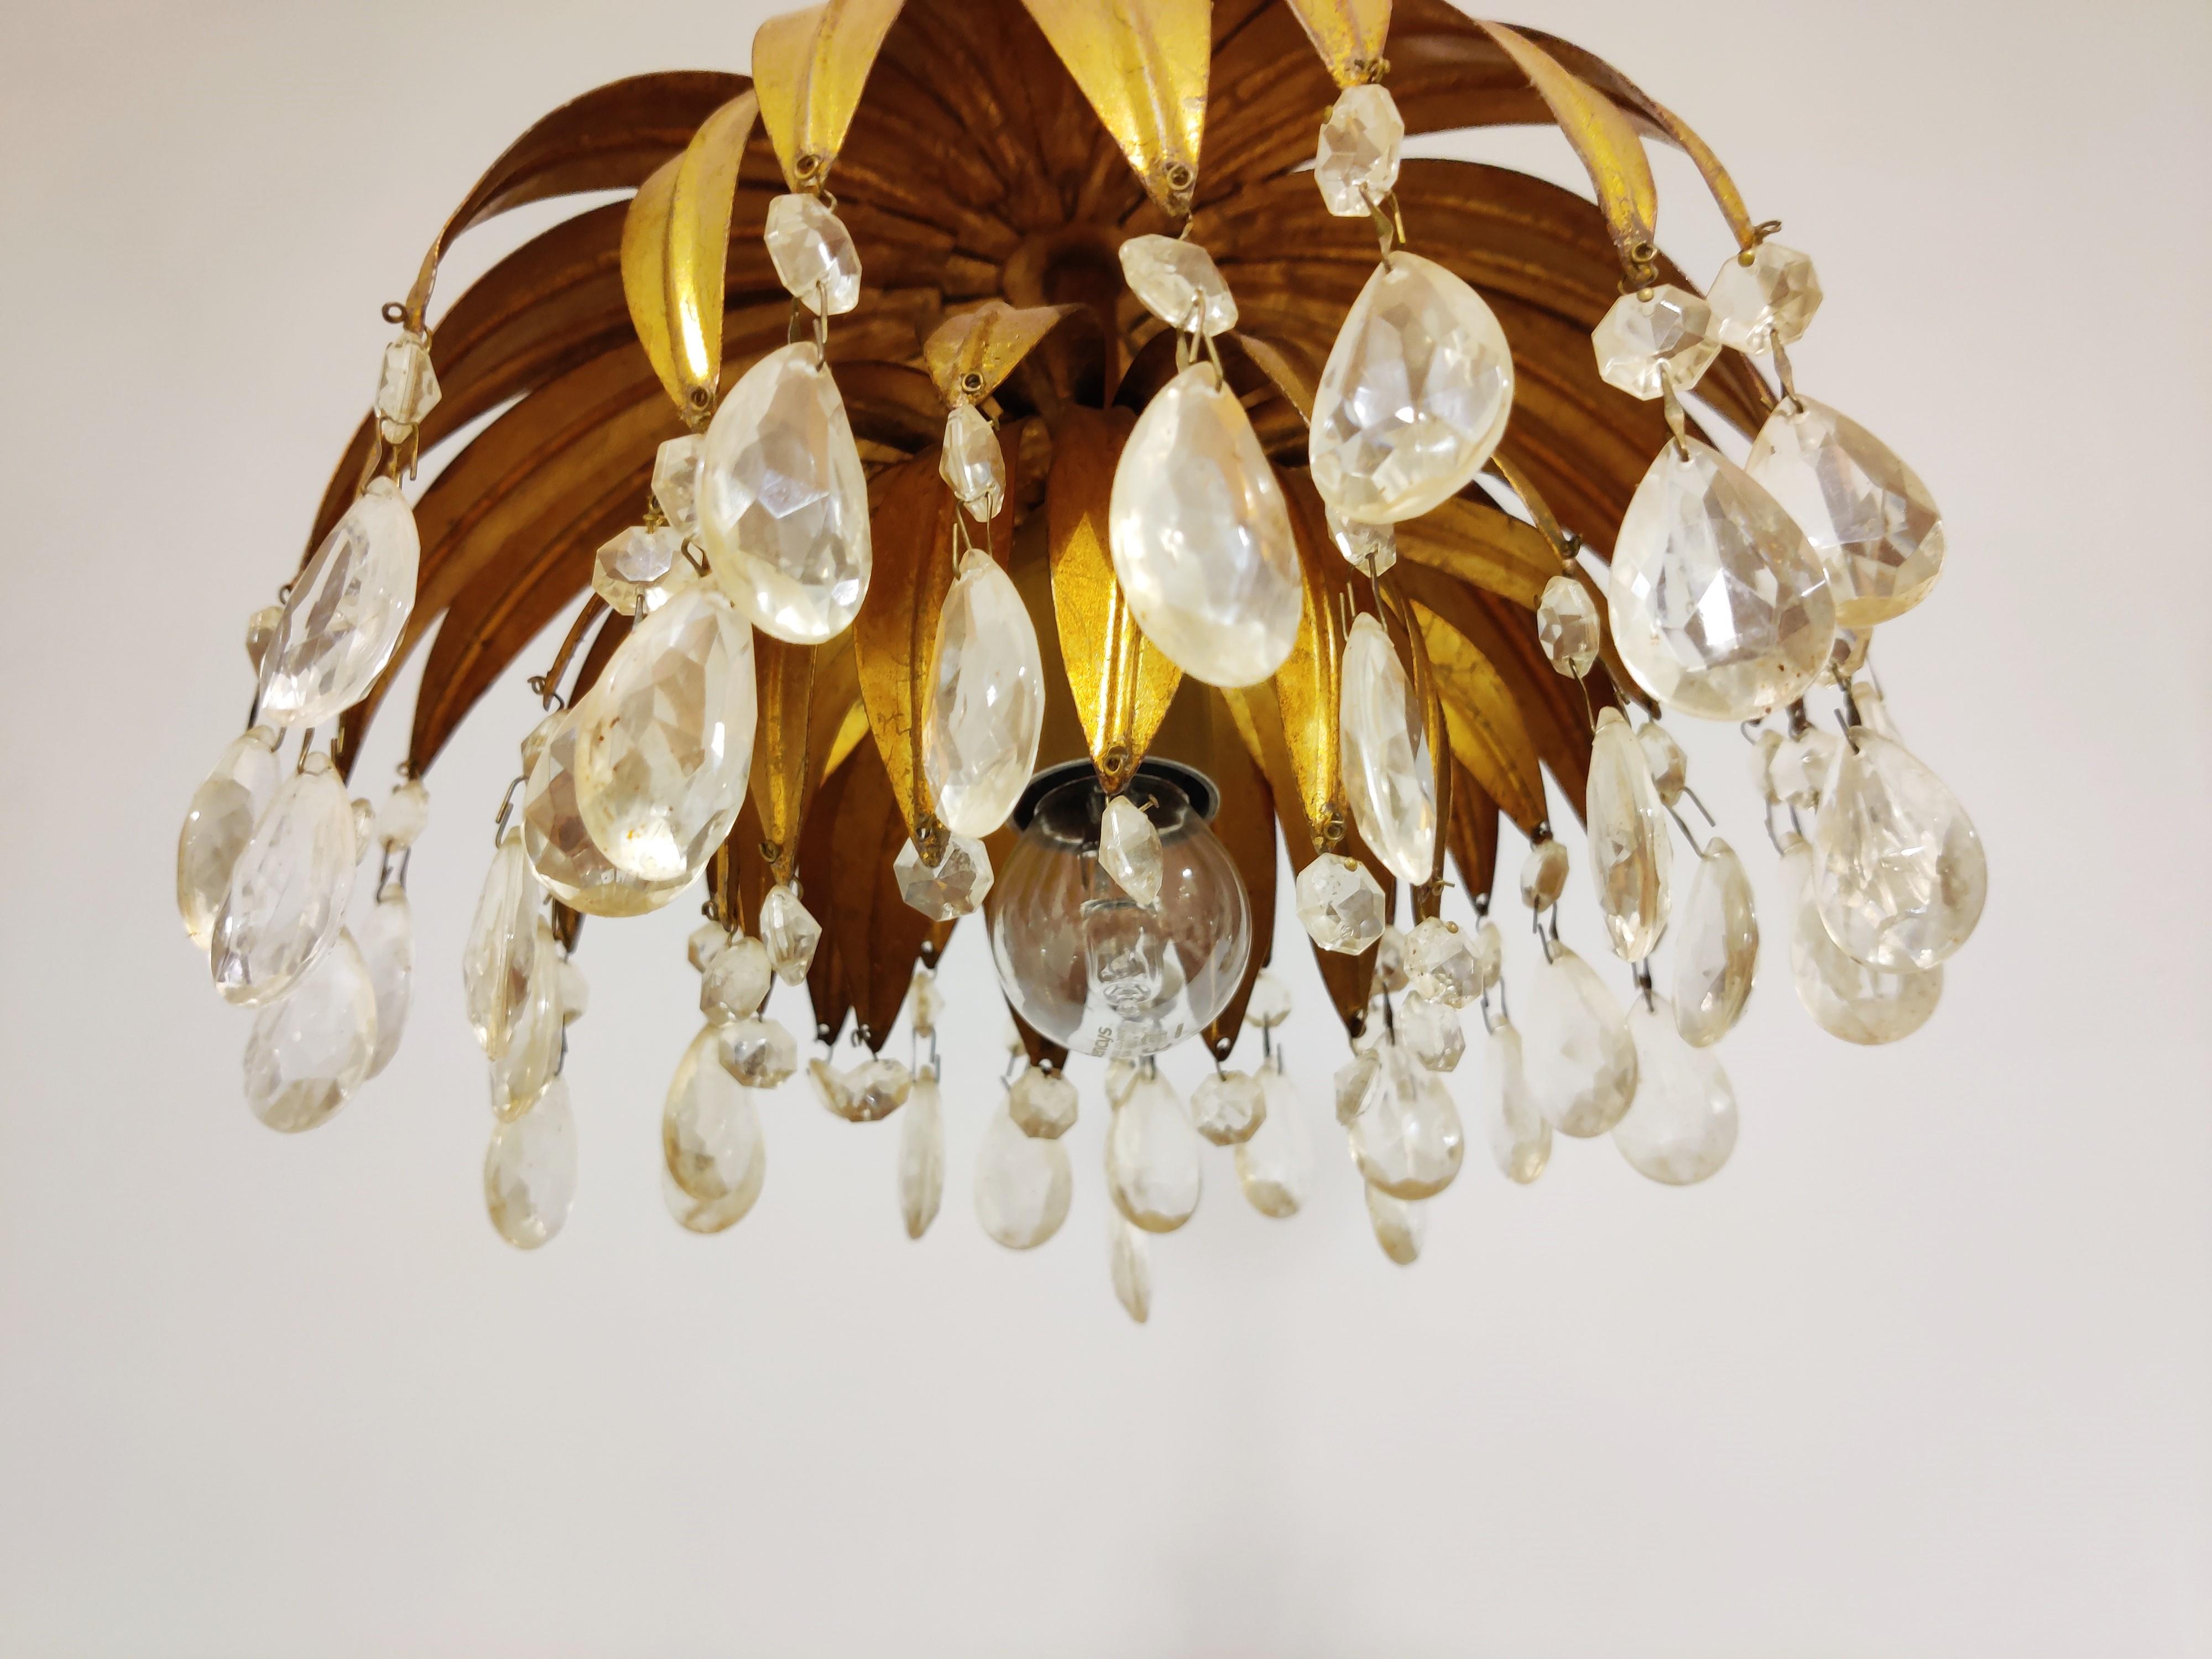 Midcentury gilt metal palm leaf pendant light

This gilt metal leaf chandelier was made in italy and has crsytal droplets

1960s - Italy

Tested and ready to use with regular E27 light bulb.

Dimensions:
Height 38cm/14.96